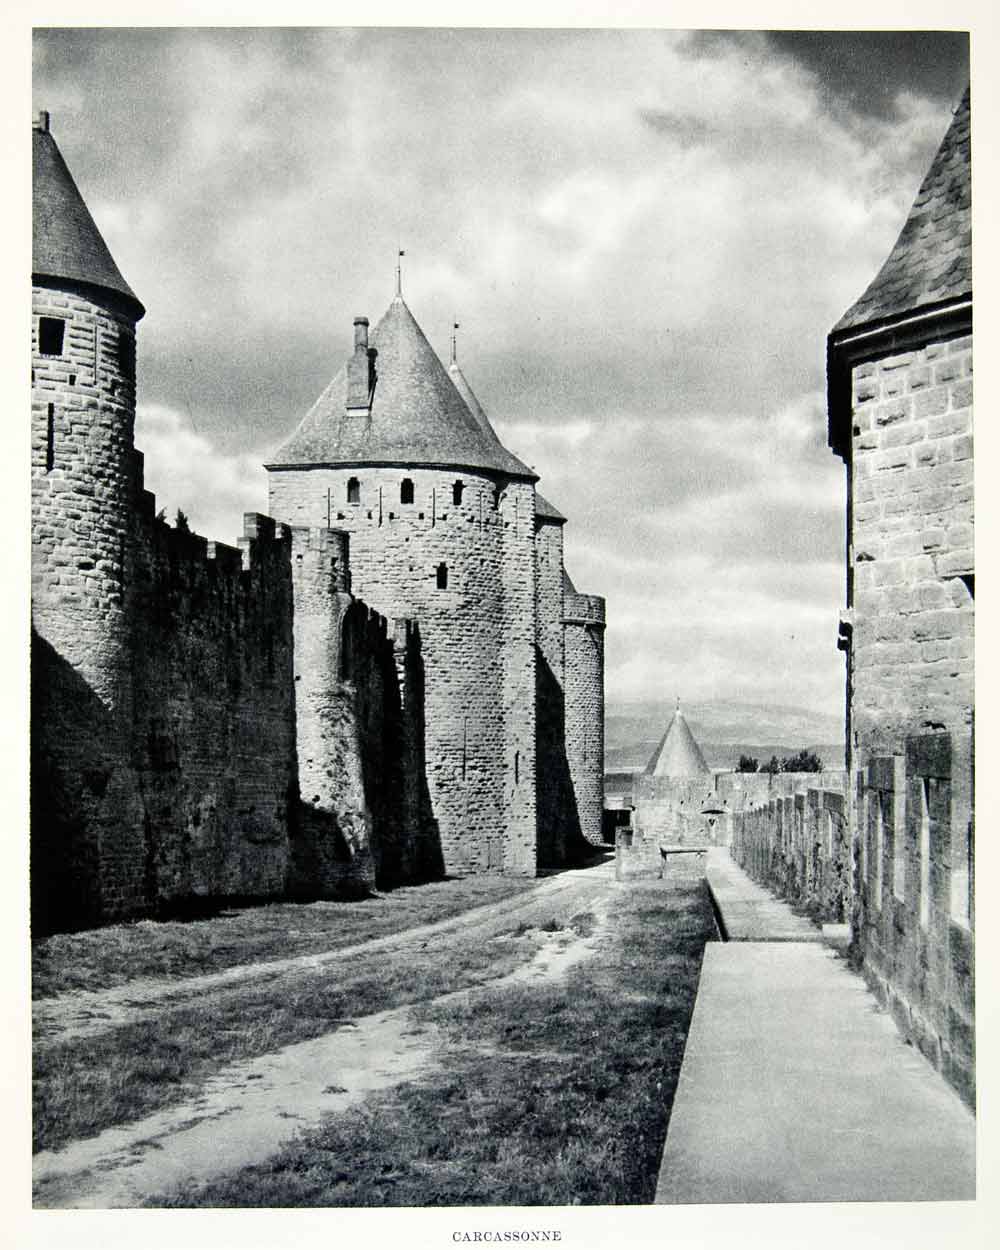 1952 Rotogravure France Town Carcassonne Fortification UNESCO Architecture XGIC3